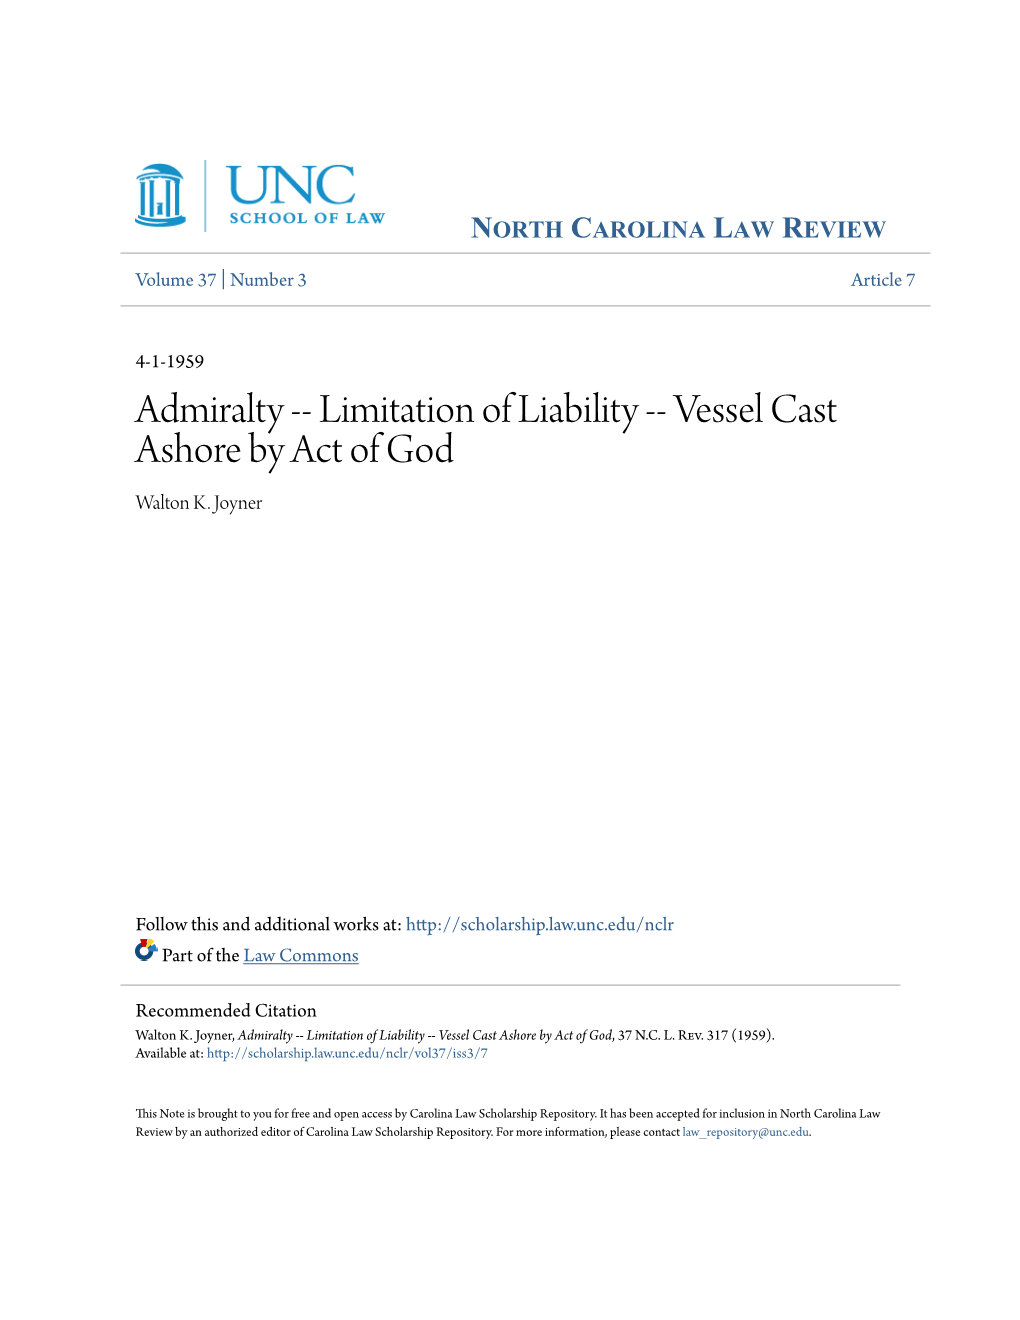 Admiralty -- Limitation of Liability -- Vessel Cast Ashore by Act of God Walton K